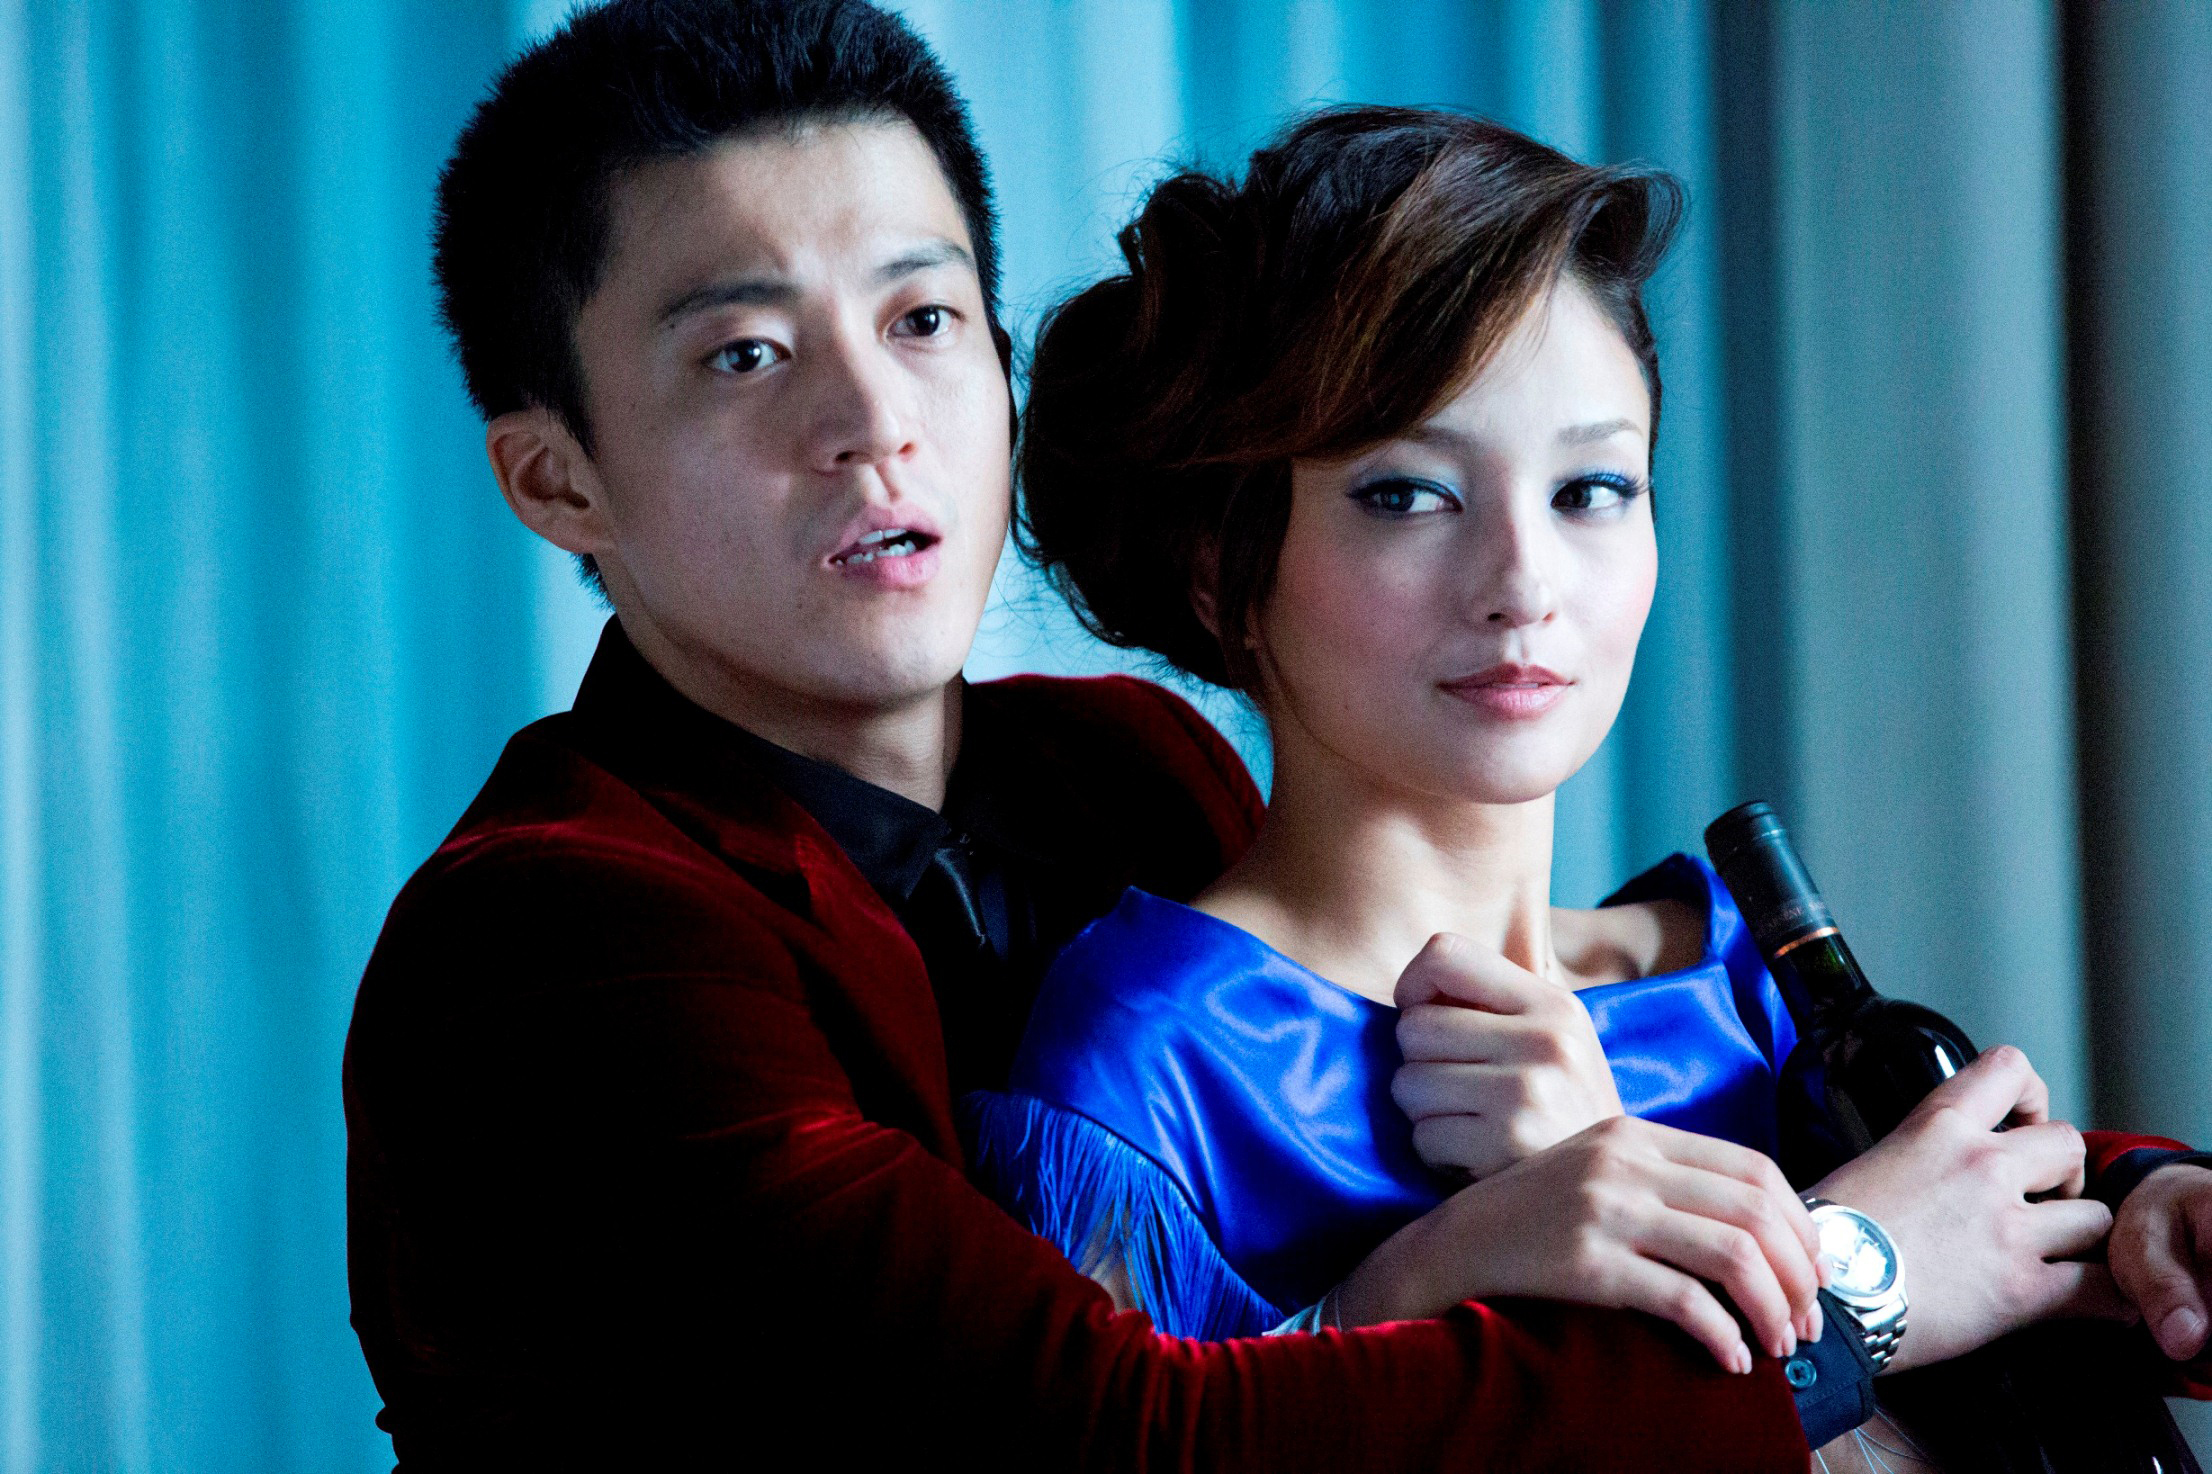 She stole my heart: Shun Oguri and Meisa Kuroki star as Arsene Lupin III and Fujiko Mine in 'Lupin III,' the live-action version of one of Japan's most popular manga and animated television series.   | TOHO PICTURES